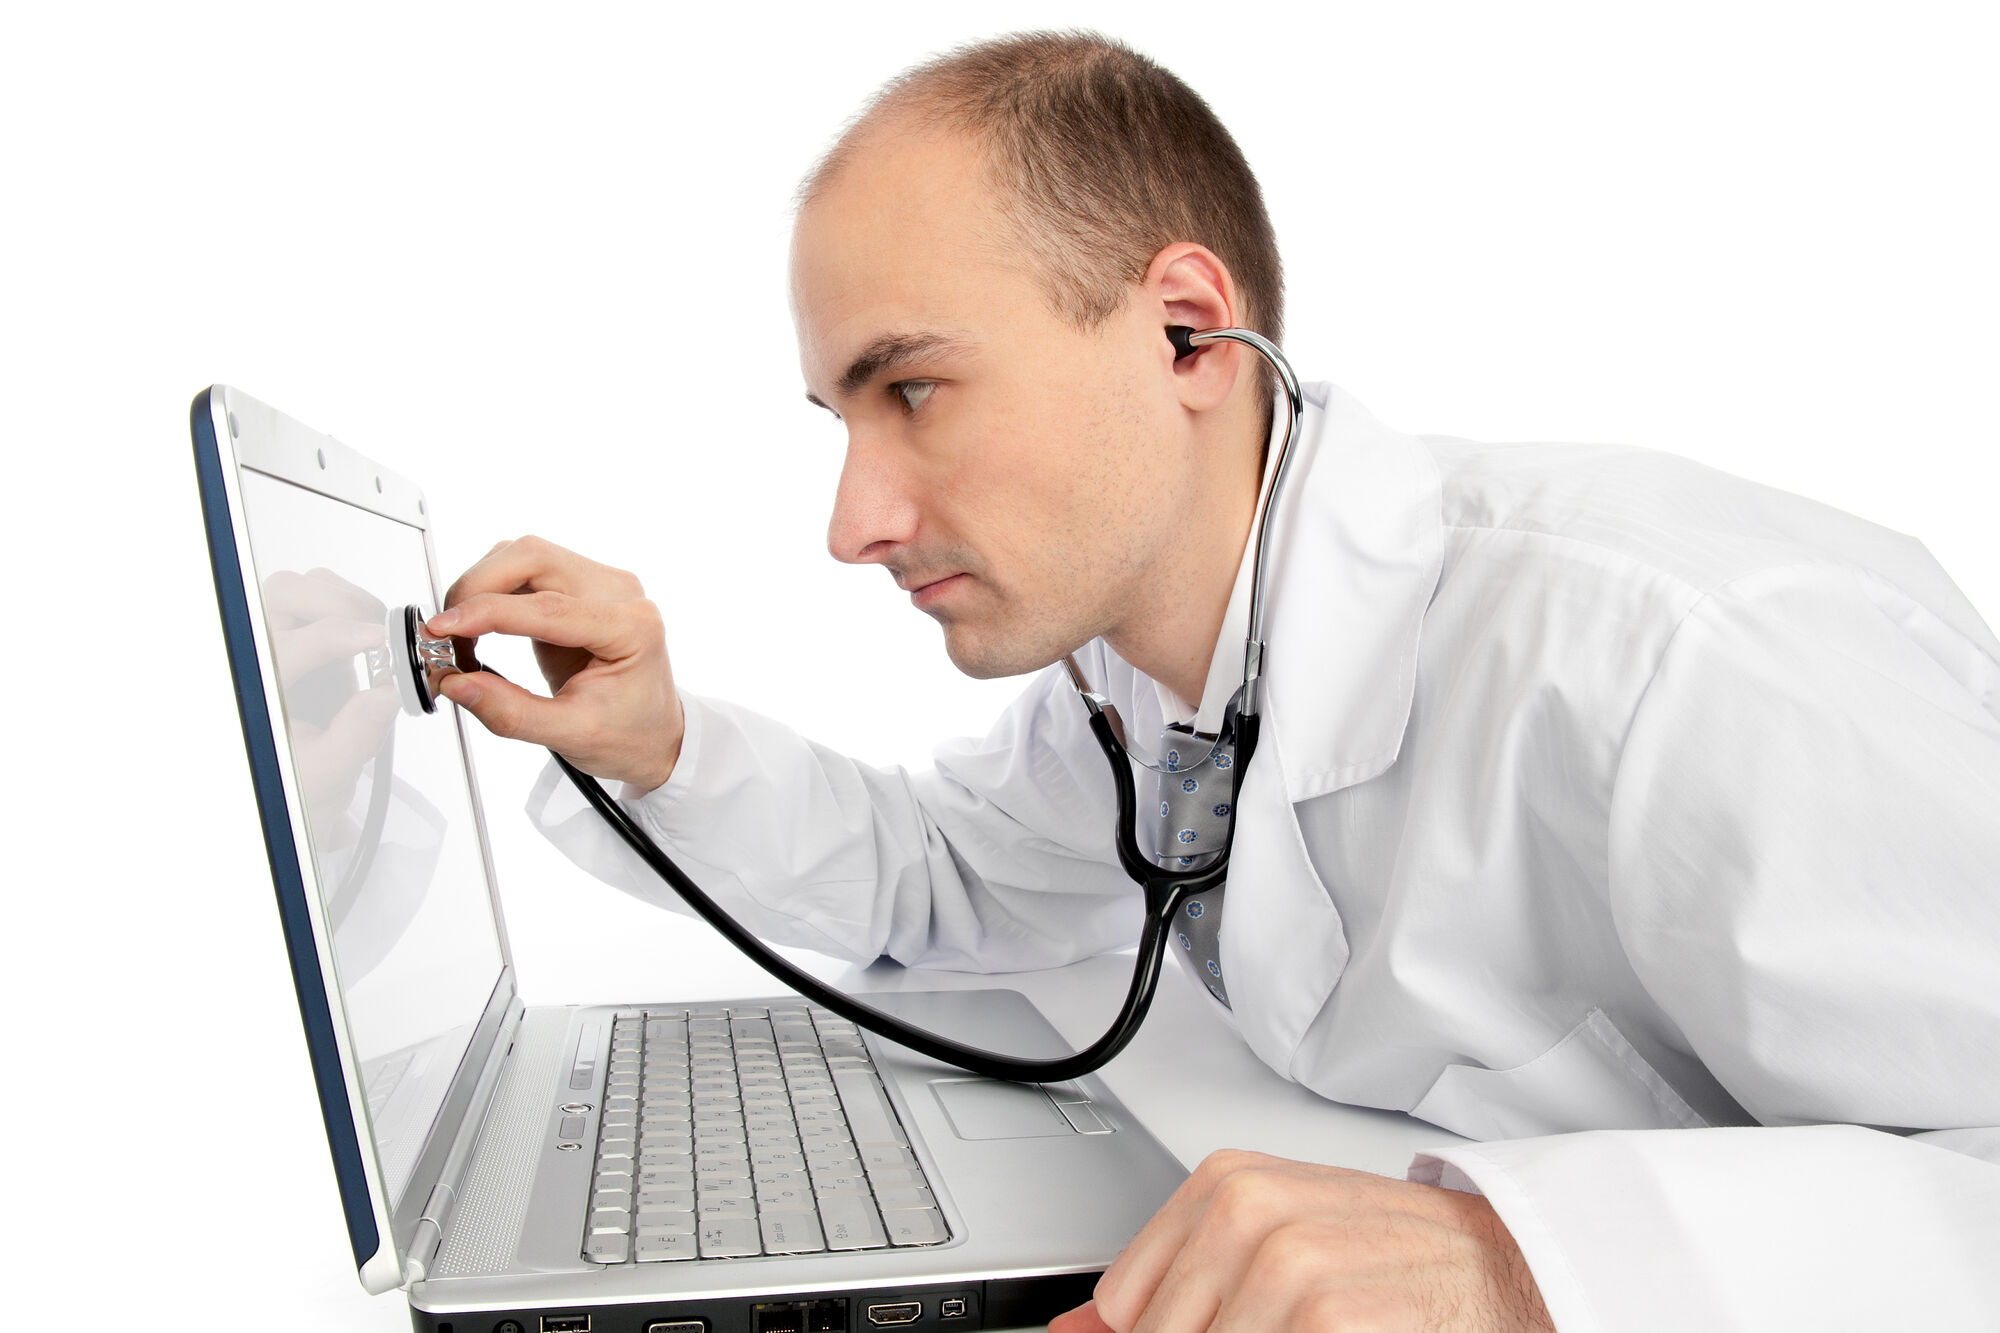 Doctor with stethoscope checking a laptop's health